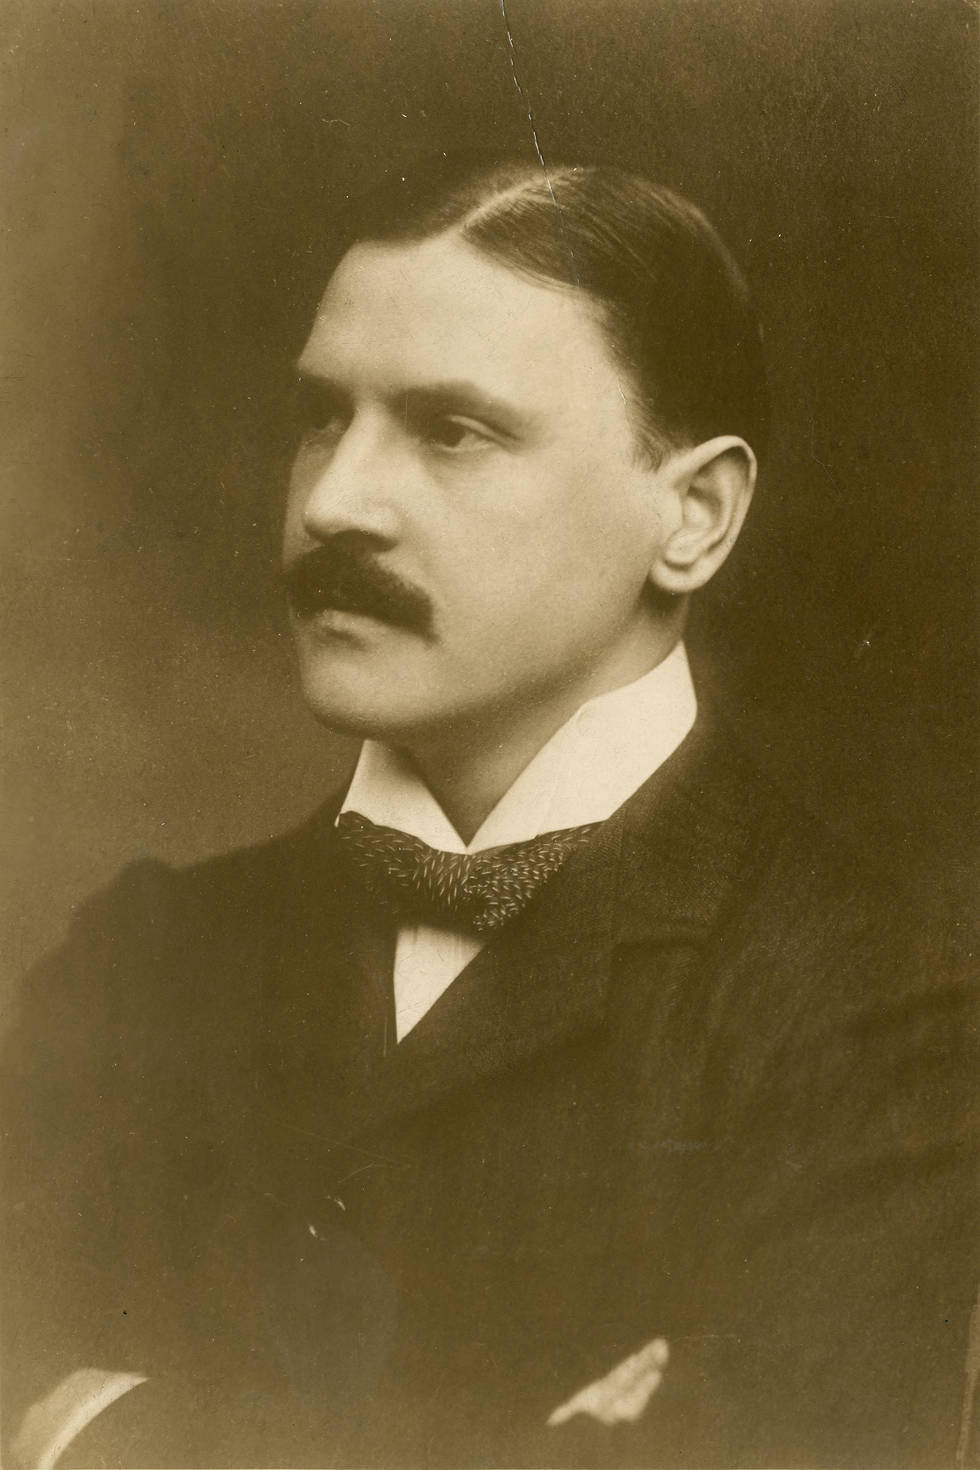 The sepia-toned photograph is a head-and-shoulders portrait of Somerset Maugham at age 37. He is posed in three-quarter profile looking to the left, with his arms folded across his chest. His dark hair is parted near the middle and brushed smoothly back. He has a dark bushy moustache. He is wearing a stiff white collar, bow tie, and dark jacket.